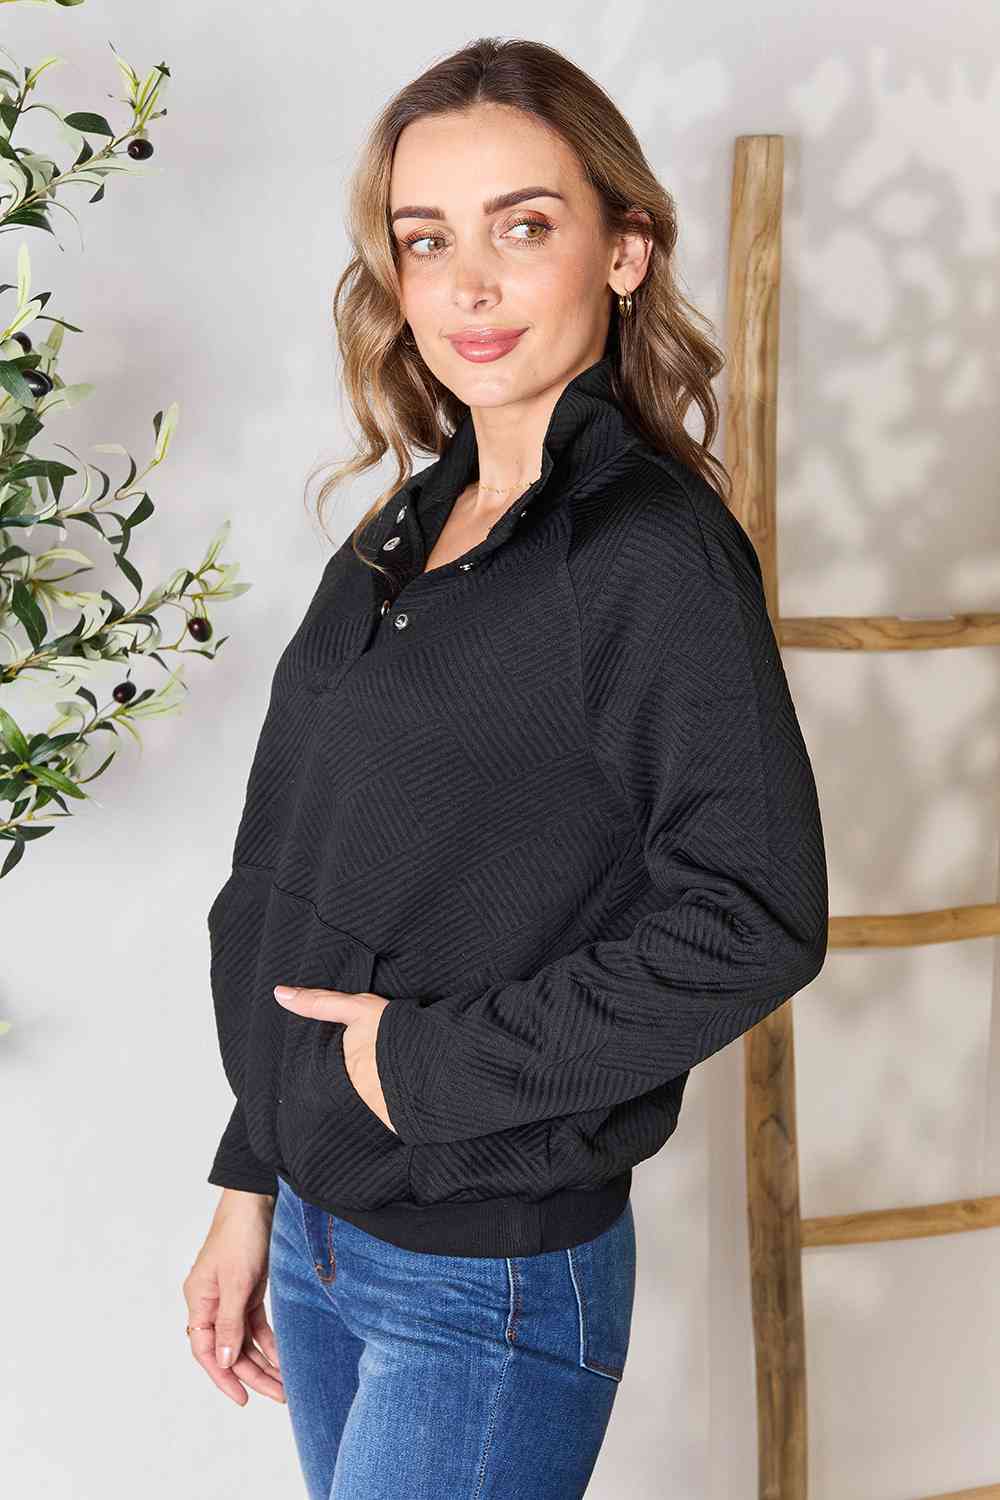 Double Take Half Buttoned Collared Neck Sweatshirt with Pocket 3